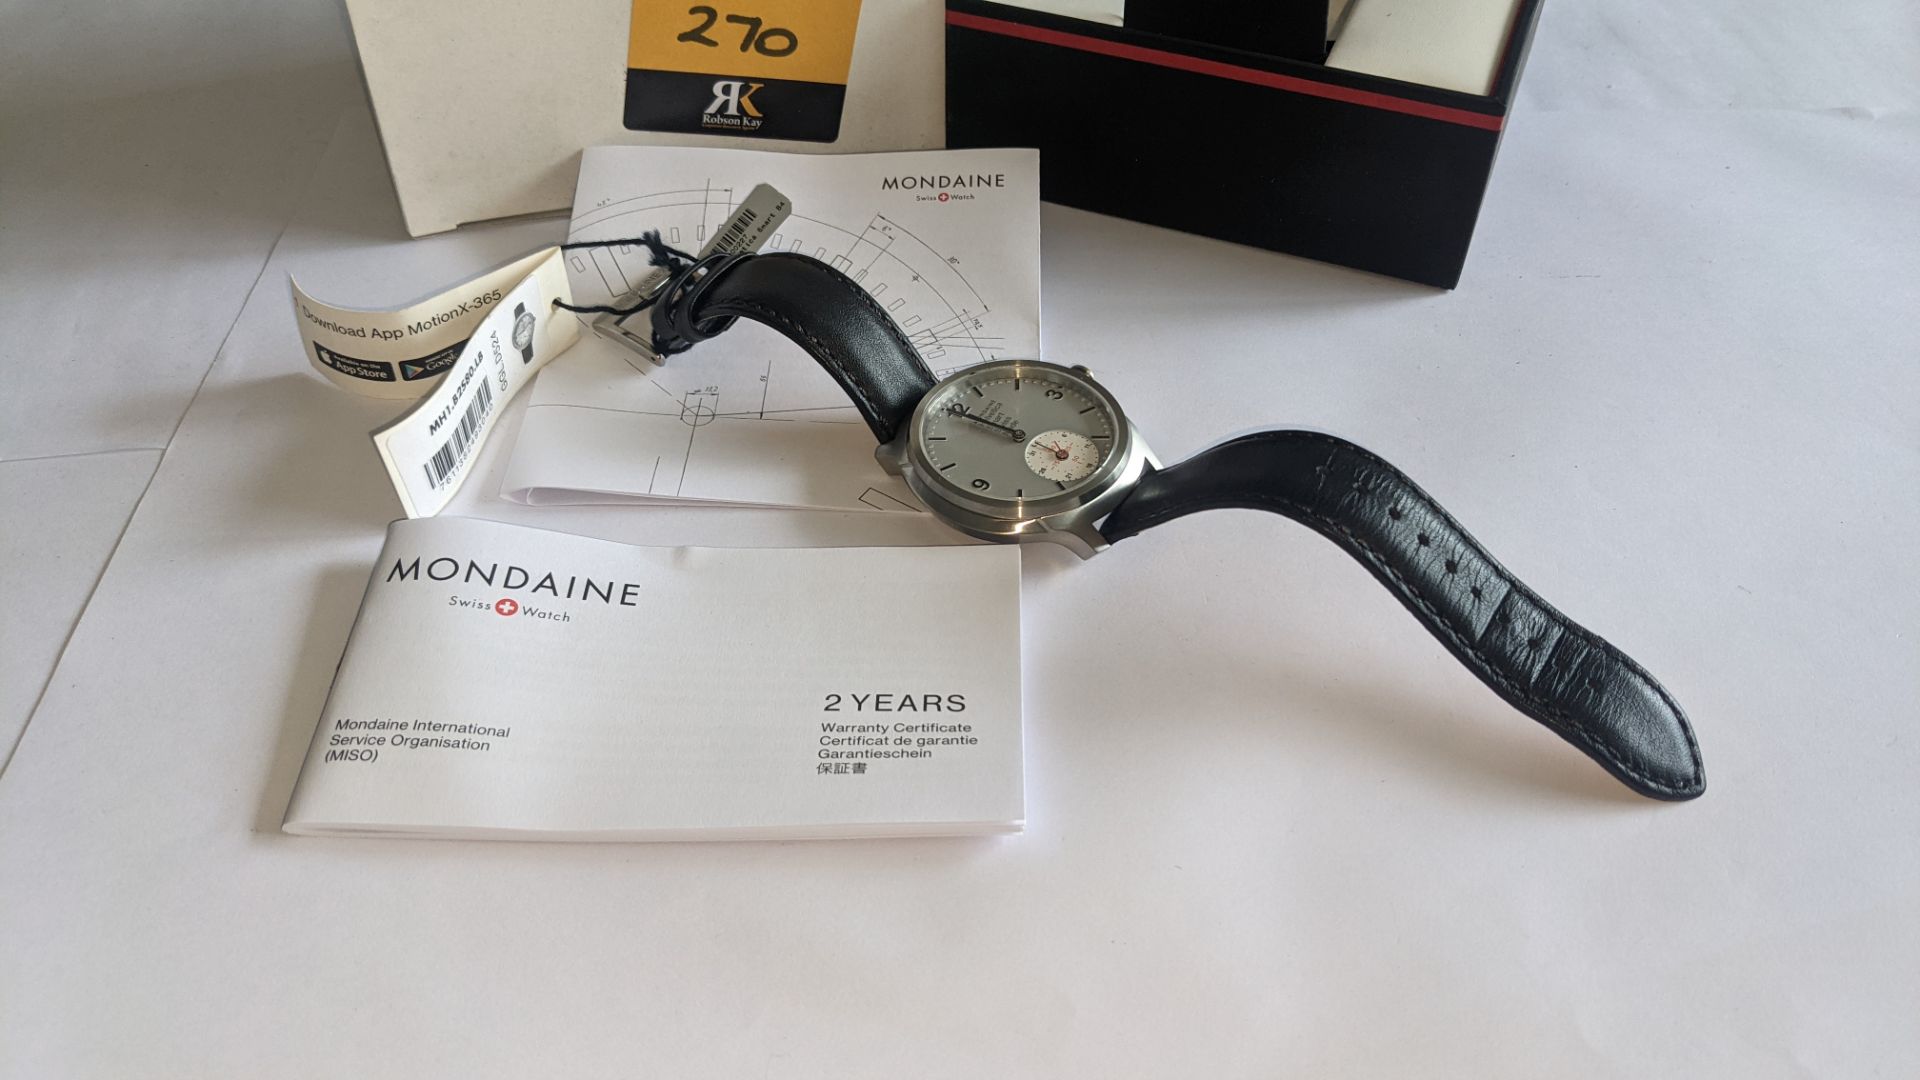 Mondaine Helvetica Smart Swiss made watch. Product code MH1.B2S80.LB. Stainless steel, water resist - Image 3 of 20